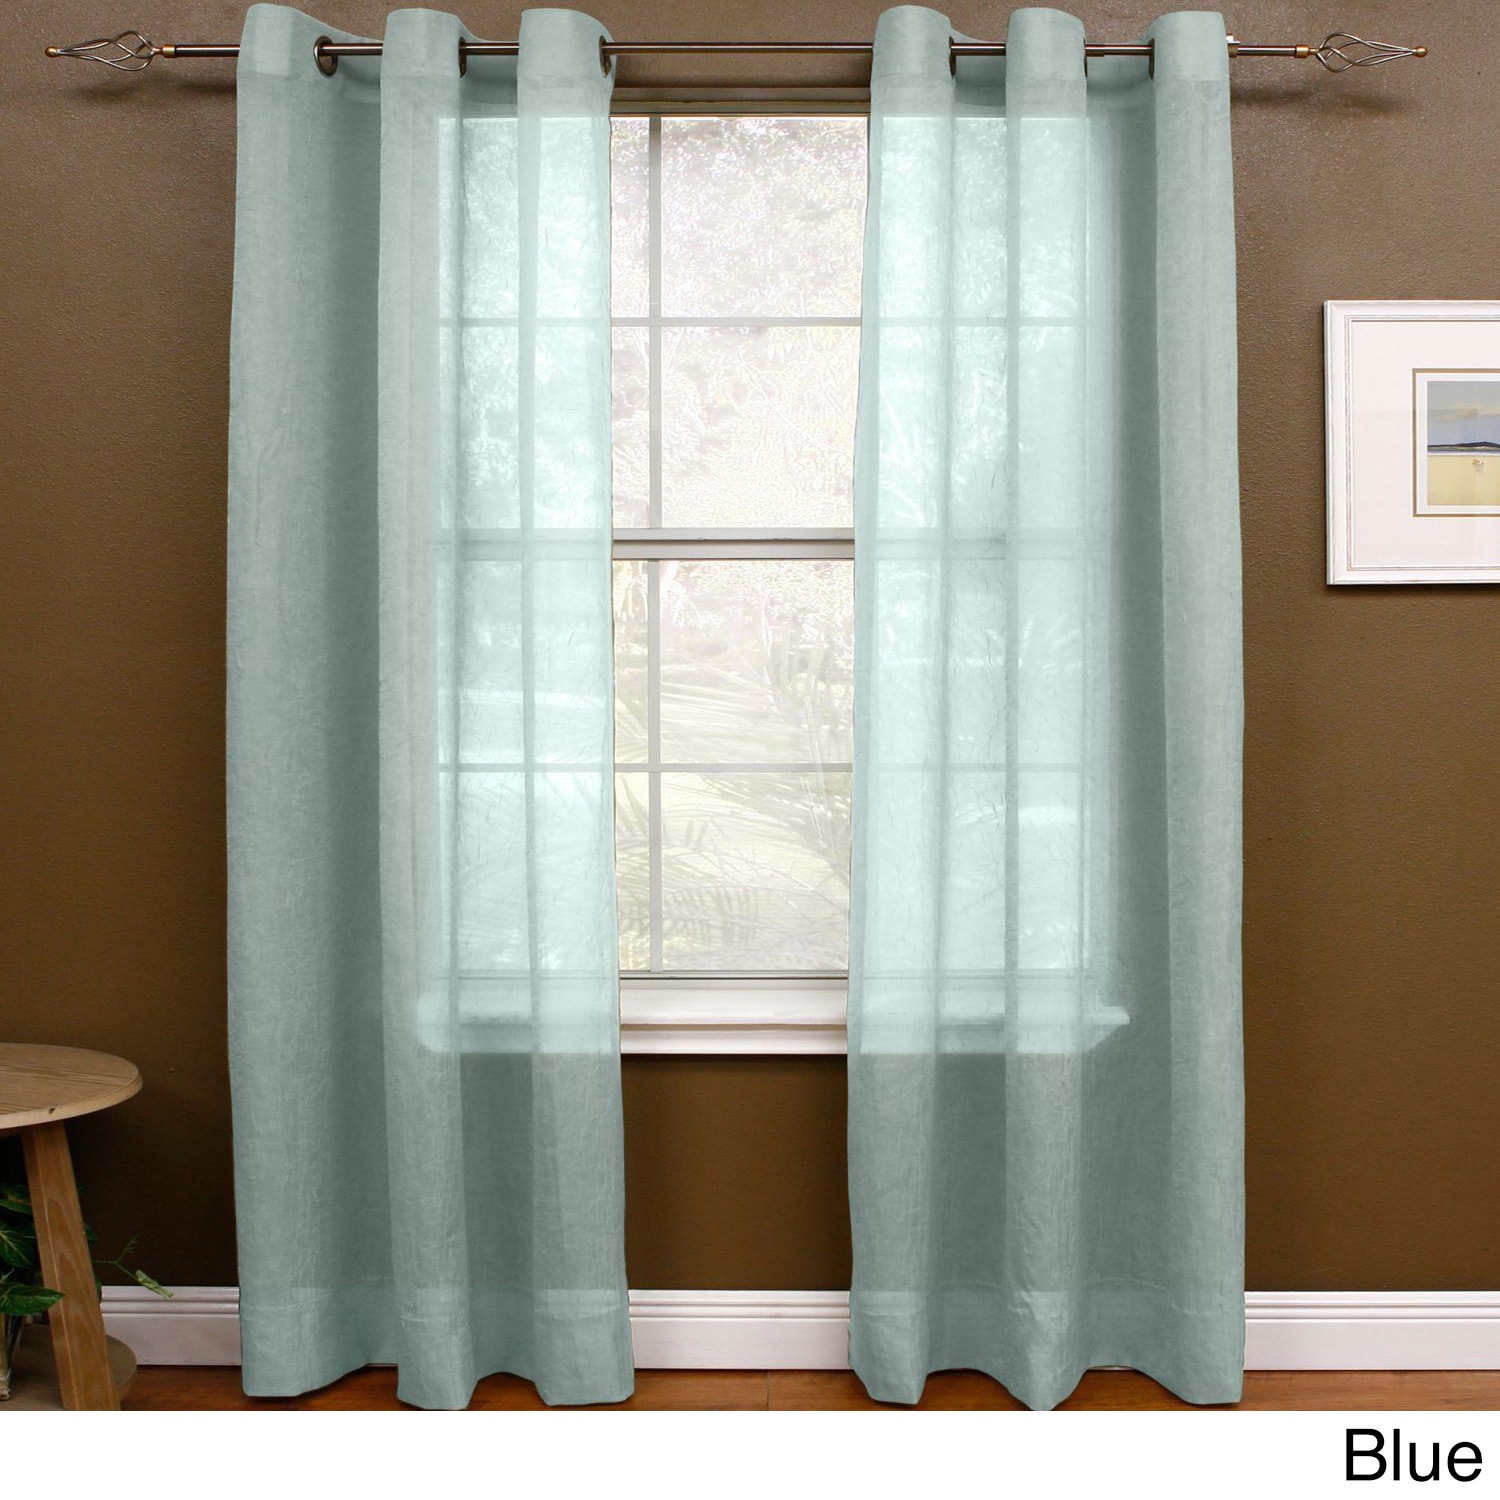 48 inch curtains